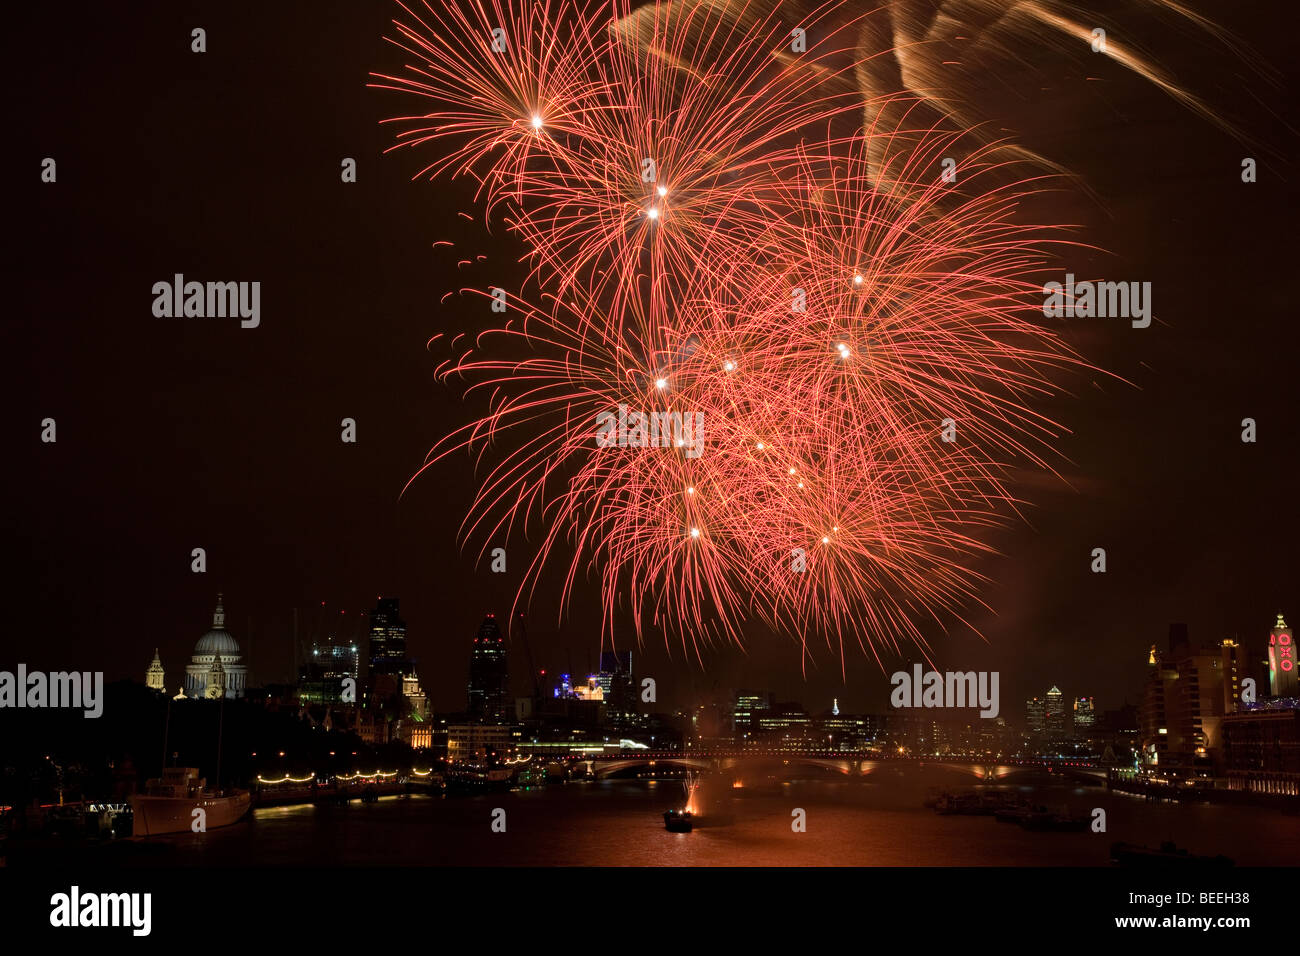 The view from Waterloo Bridge during... The Thames Festival fireworks display. Stock Photo